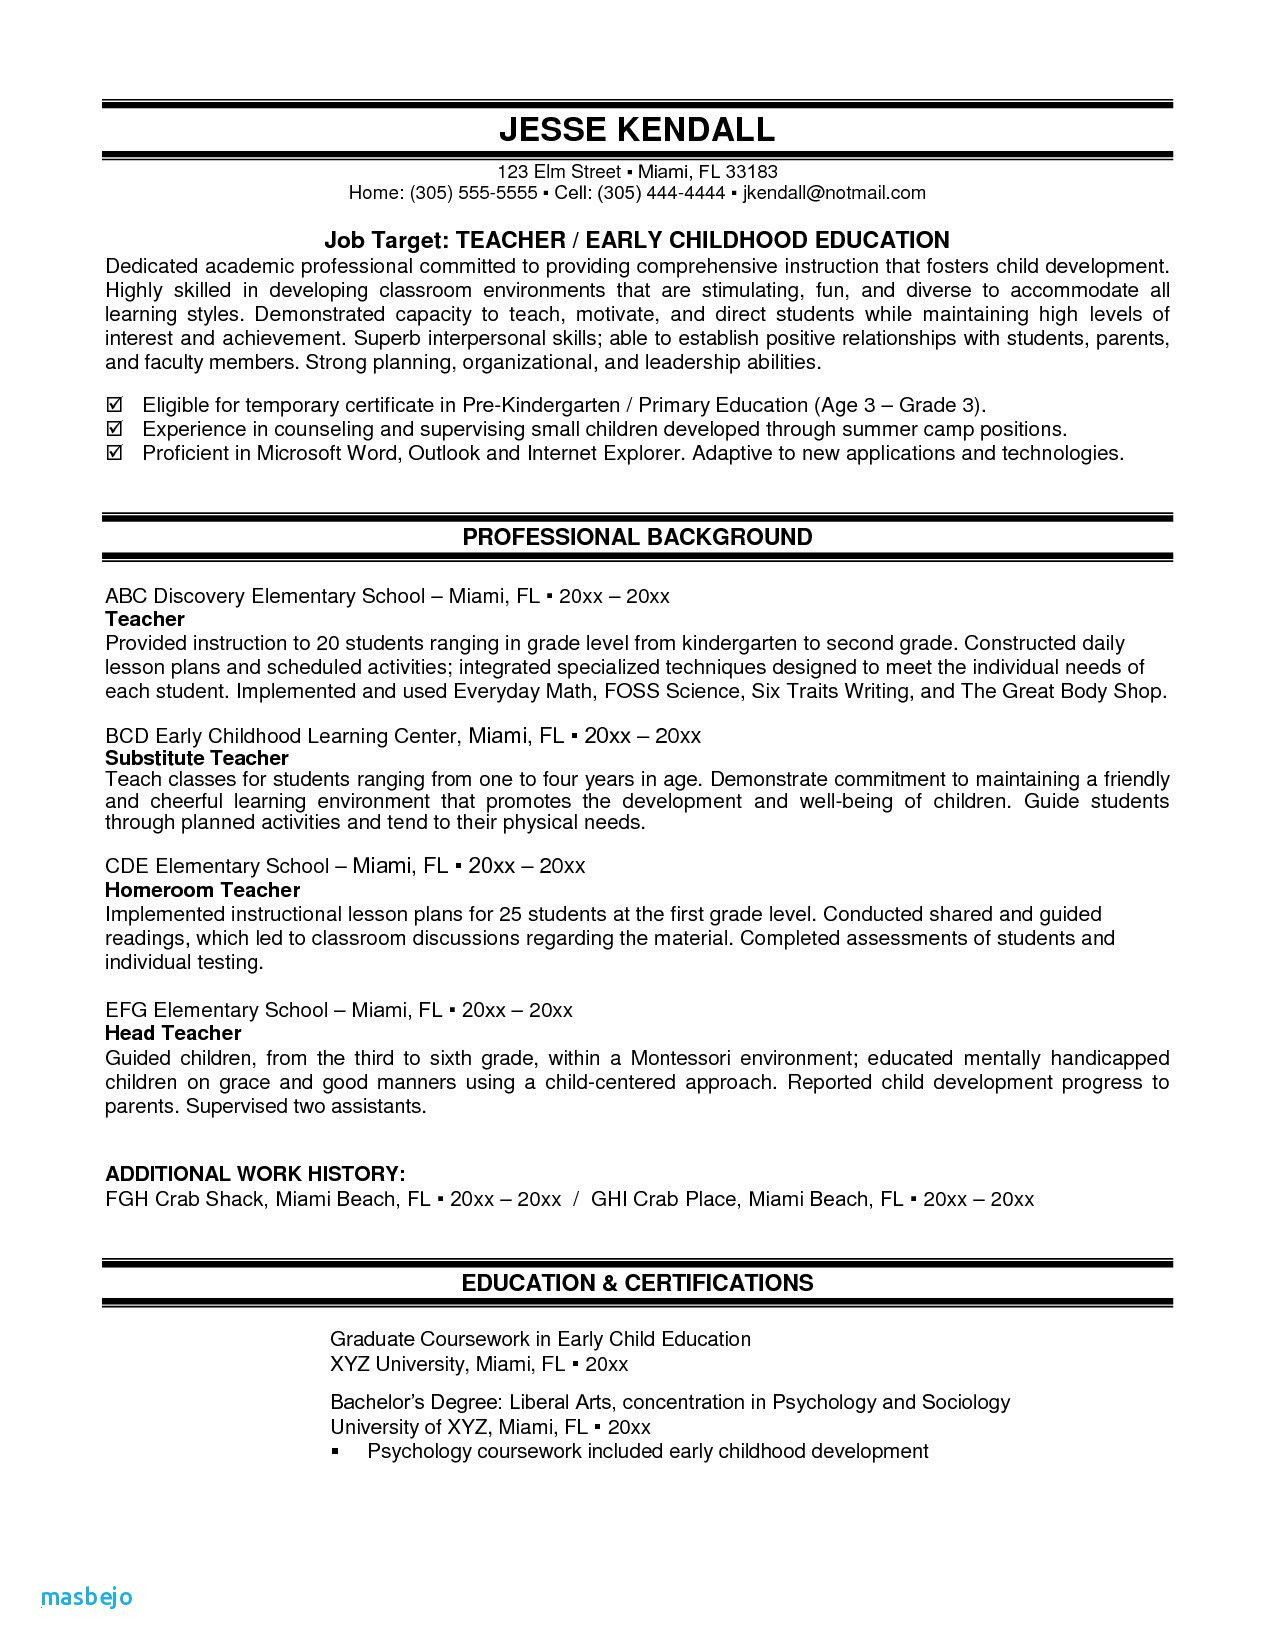 Sample Resume for Kindergarten Teacher assistant 80 Beautiful Image Of Resume Examples Child Care assistant …